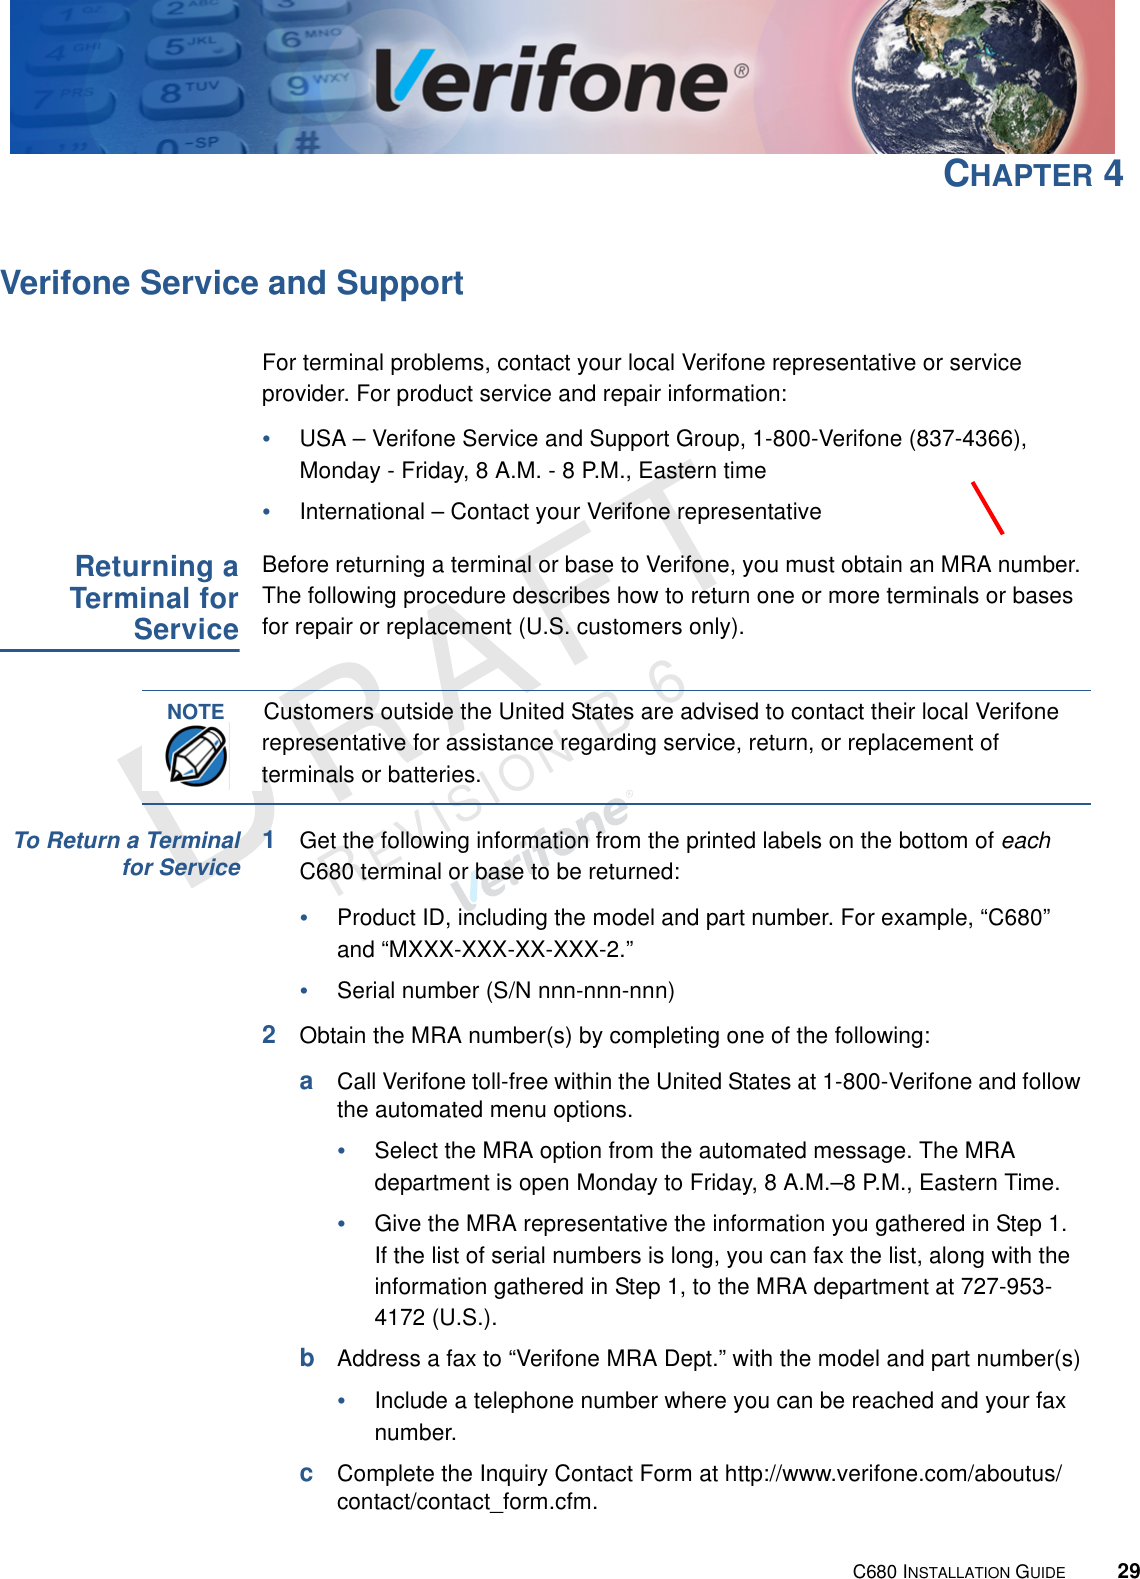 C680 INSTALLATION GUIDE29RAFTREVISION B.6 CHAPTER 4Verifone Service and SupportFor terminal problems, contact your local Verifone representative or service provider. For product service and repair information:•USA – Verifone Service and Support Group, 1-800-Verifone (837-4366), Monday - Friday, 8 A.M. - 8 P.M., Eastern time•International – Contact your Verifone representative Returning aTerminal forServiceBefore returning a terminal or base to Verifone, you must obtain an MRA number. The following procedure describes how to return one or more terminals or bases for repair or replacement (U.S. customers only). To Return a Terminalfor Service1Get the following information from the printed labels on the bottom of each C680 terminal or base to be returned:•Product ID, including the model and part number. For example, “C680” and “MXXX-XXX-XX-XXX-2.”•Serial number (S/N nnn-nnn-nnn)2Obtain the MRA number(s) by completing one of the following:aCall Verifone toll-free within the United States at 1-800-Verifone and follow the automated menu options.•Select the MRA option from the automated message. The MRA department is open Monday to Friday, 8 A.M.–8 P.M., Eastern Time.•Give the MRA representative the information you gathered in Step 1.If the list of serial numbers is long, you can fax the list, along with the information gathered in Step 1, to the MRA department at 727-953-4172 (U.S.).bAddress a fax to “Verifone MRA Dept.” with the model and part number(s)•Include a telephone number where you can be reached and your fax number.cComplete the Inquiry Contact Form at http://www.verifone.com/aboutus/contact/contact_form.cfm.NOTECustomers outside the United States are advised to contact their local Verifone representative for assistance regarding service, return, or replacement of terminals or batteries.